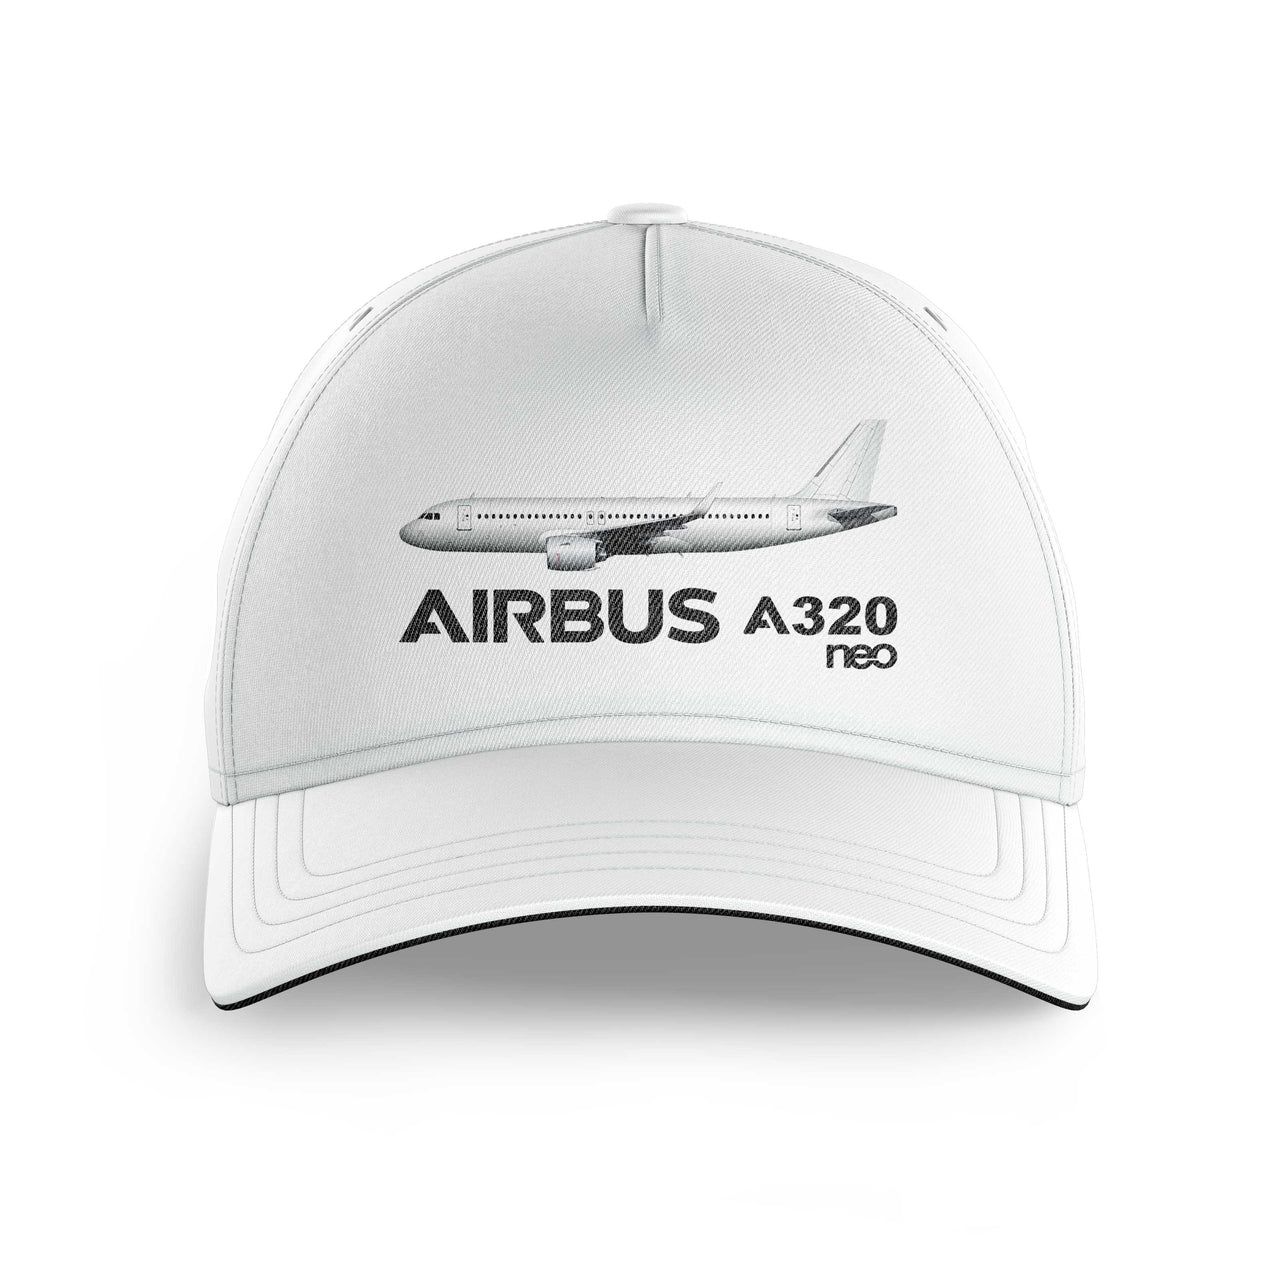 The Airbus A320Neo Printed Hats